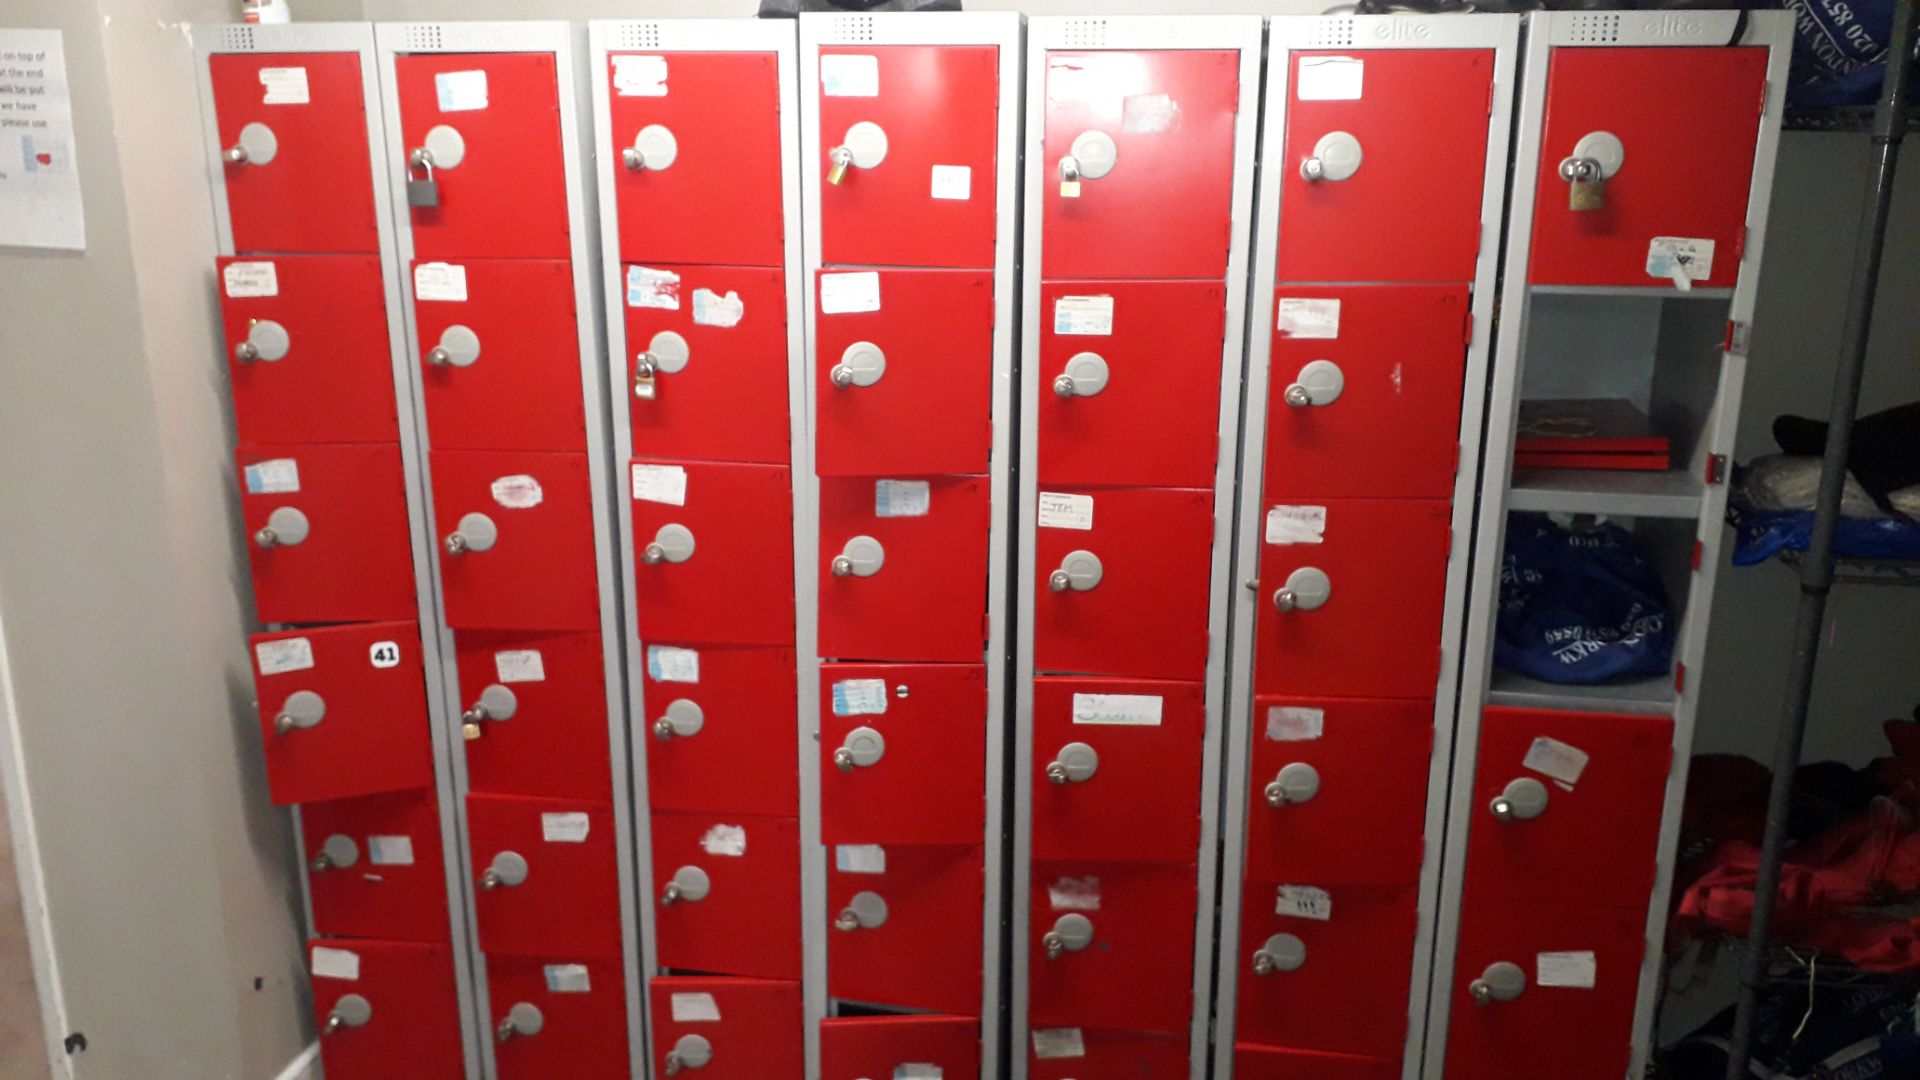 7 Elite 6 compartment steel staff lockers, 1866 x 300 x 450mm and wire shelving unit